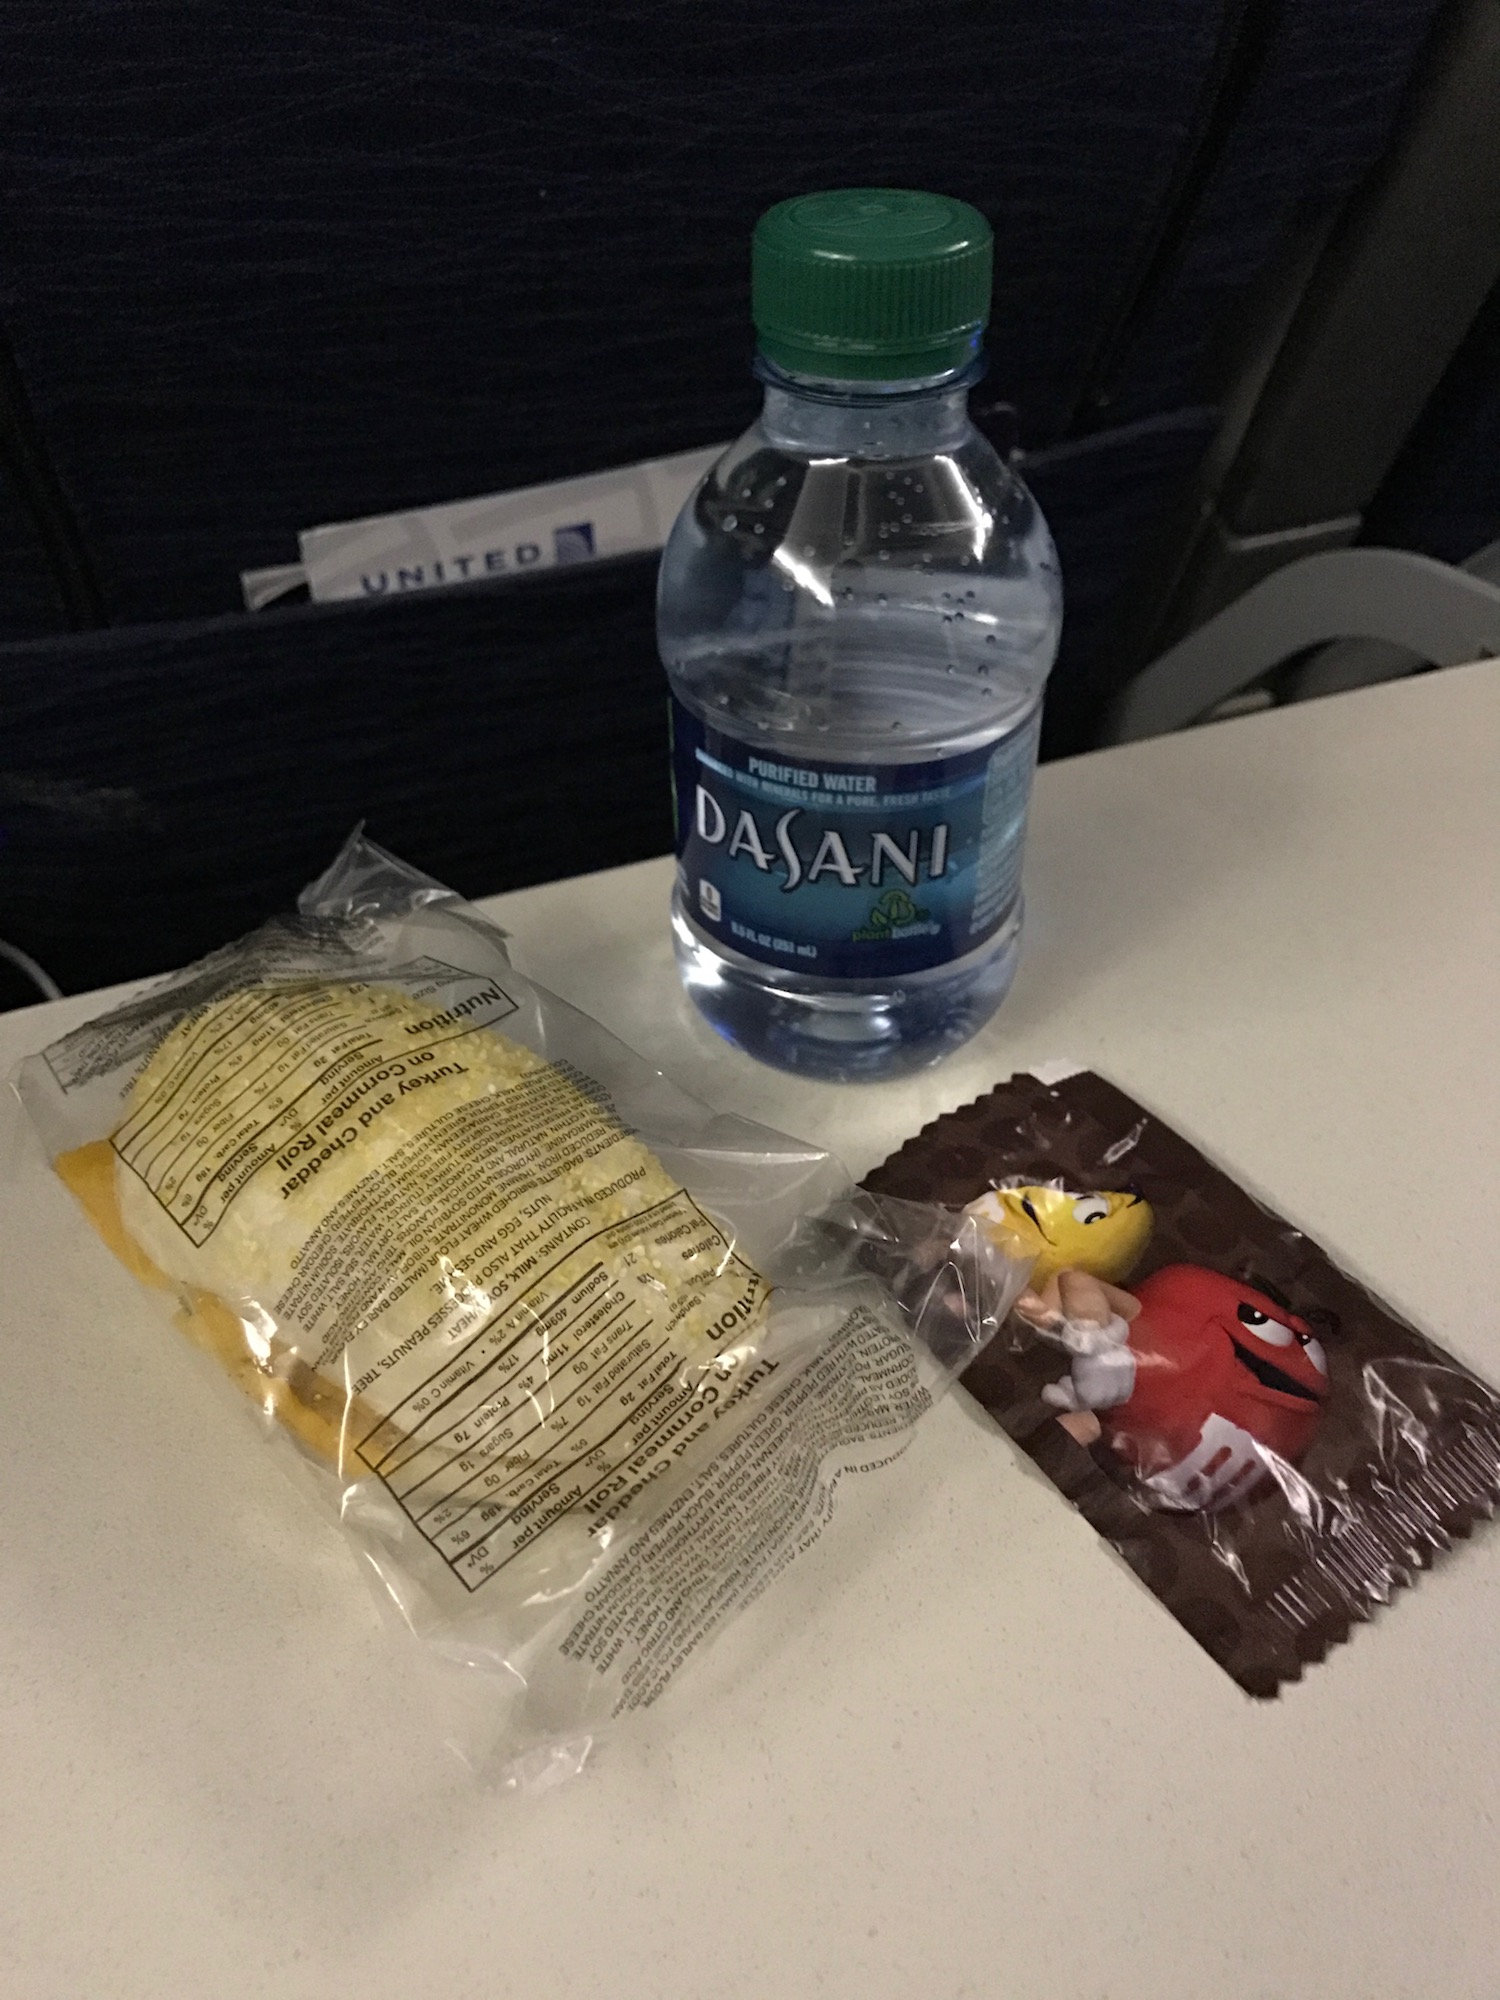 United Airlines Economy Class Meal SFO-FRA 02